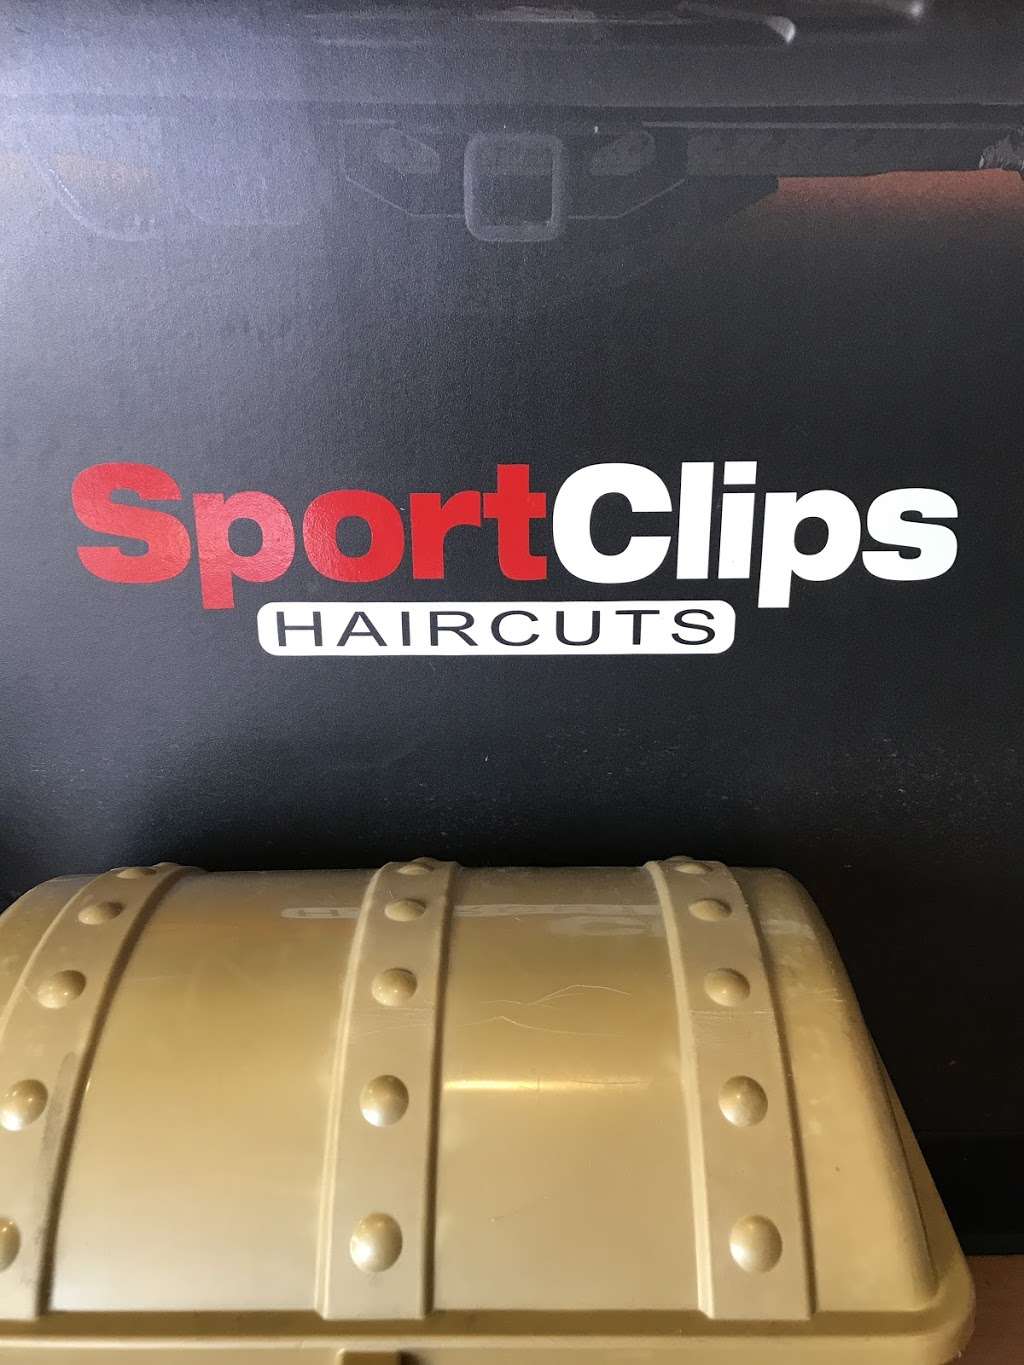 Sport Clips Haircuts of Sawyer Heights | 1911 Taylor St, Houston, TX 77007 | Phone: (713) 426-3512